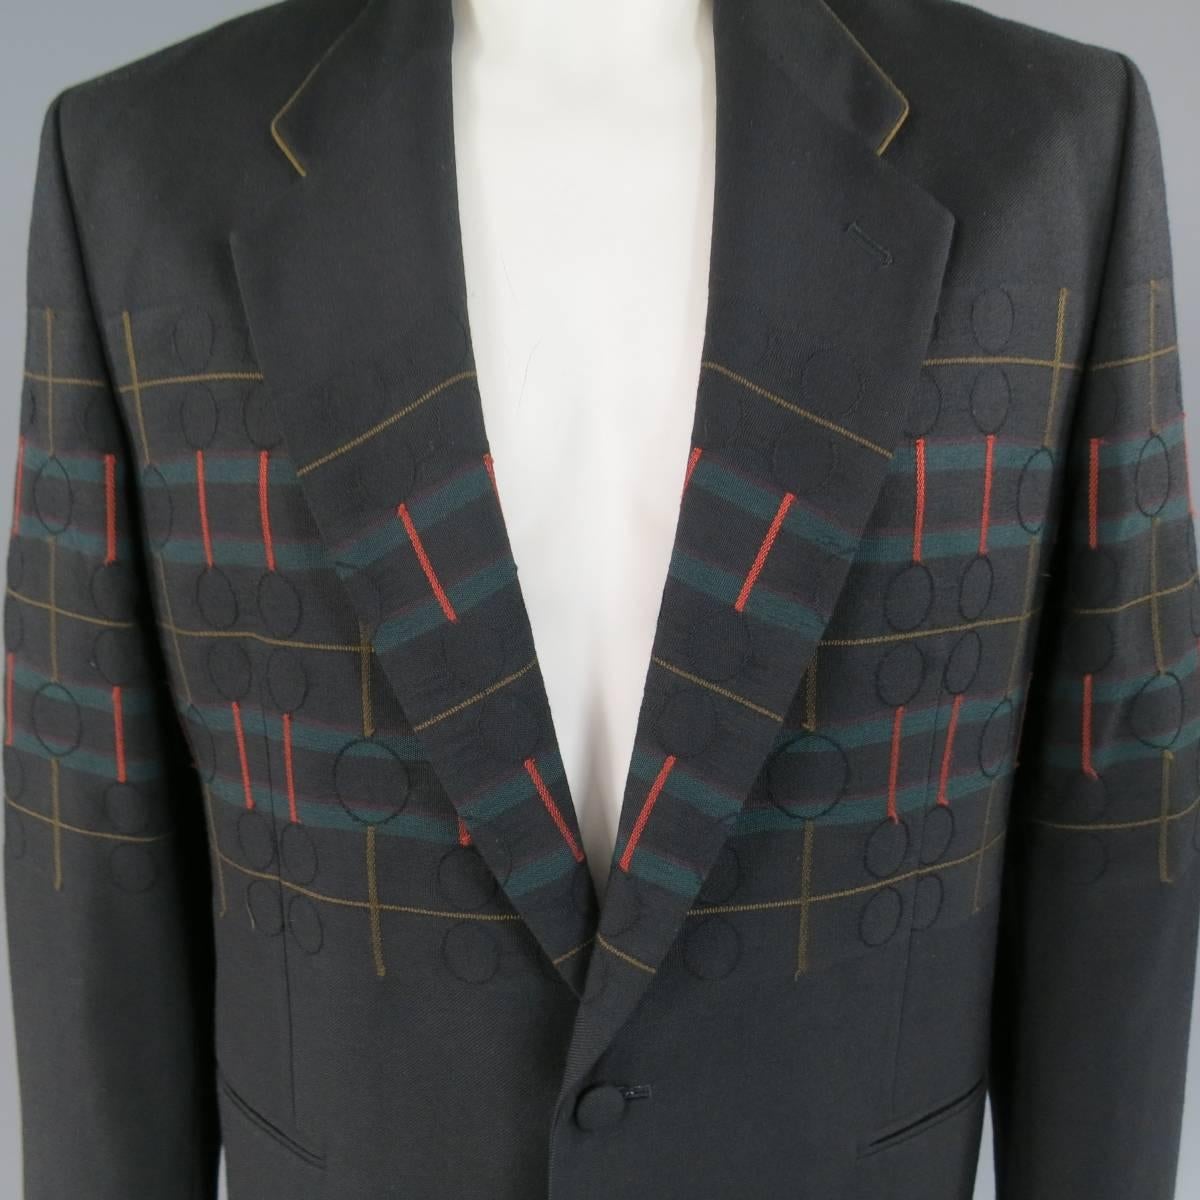 This vintage MATSUDA oversized sport coat comes in a medium weight black wool twill and features a large notch lapel with tan suede piping on the collar, two fabric covered button closure, double slip pockets, and tan, green, burgundy, and red